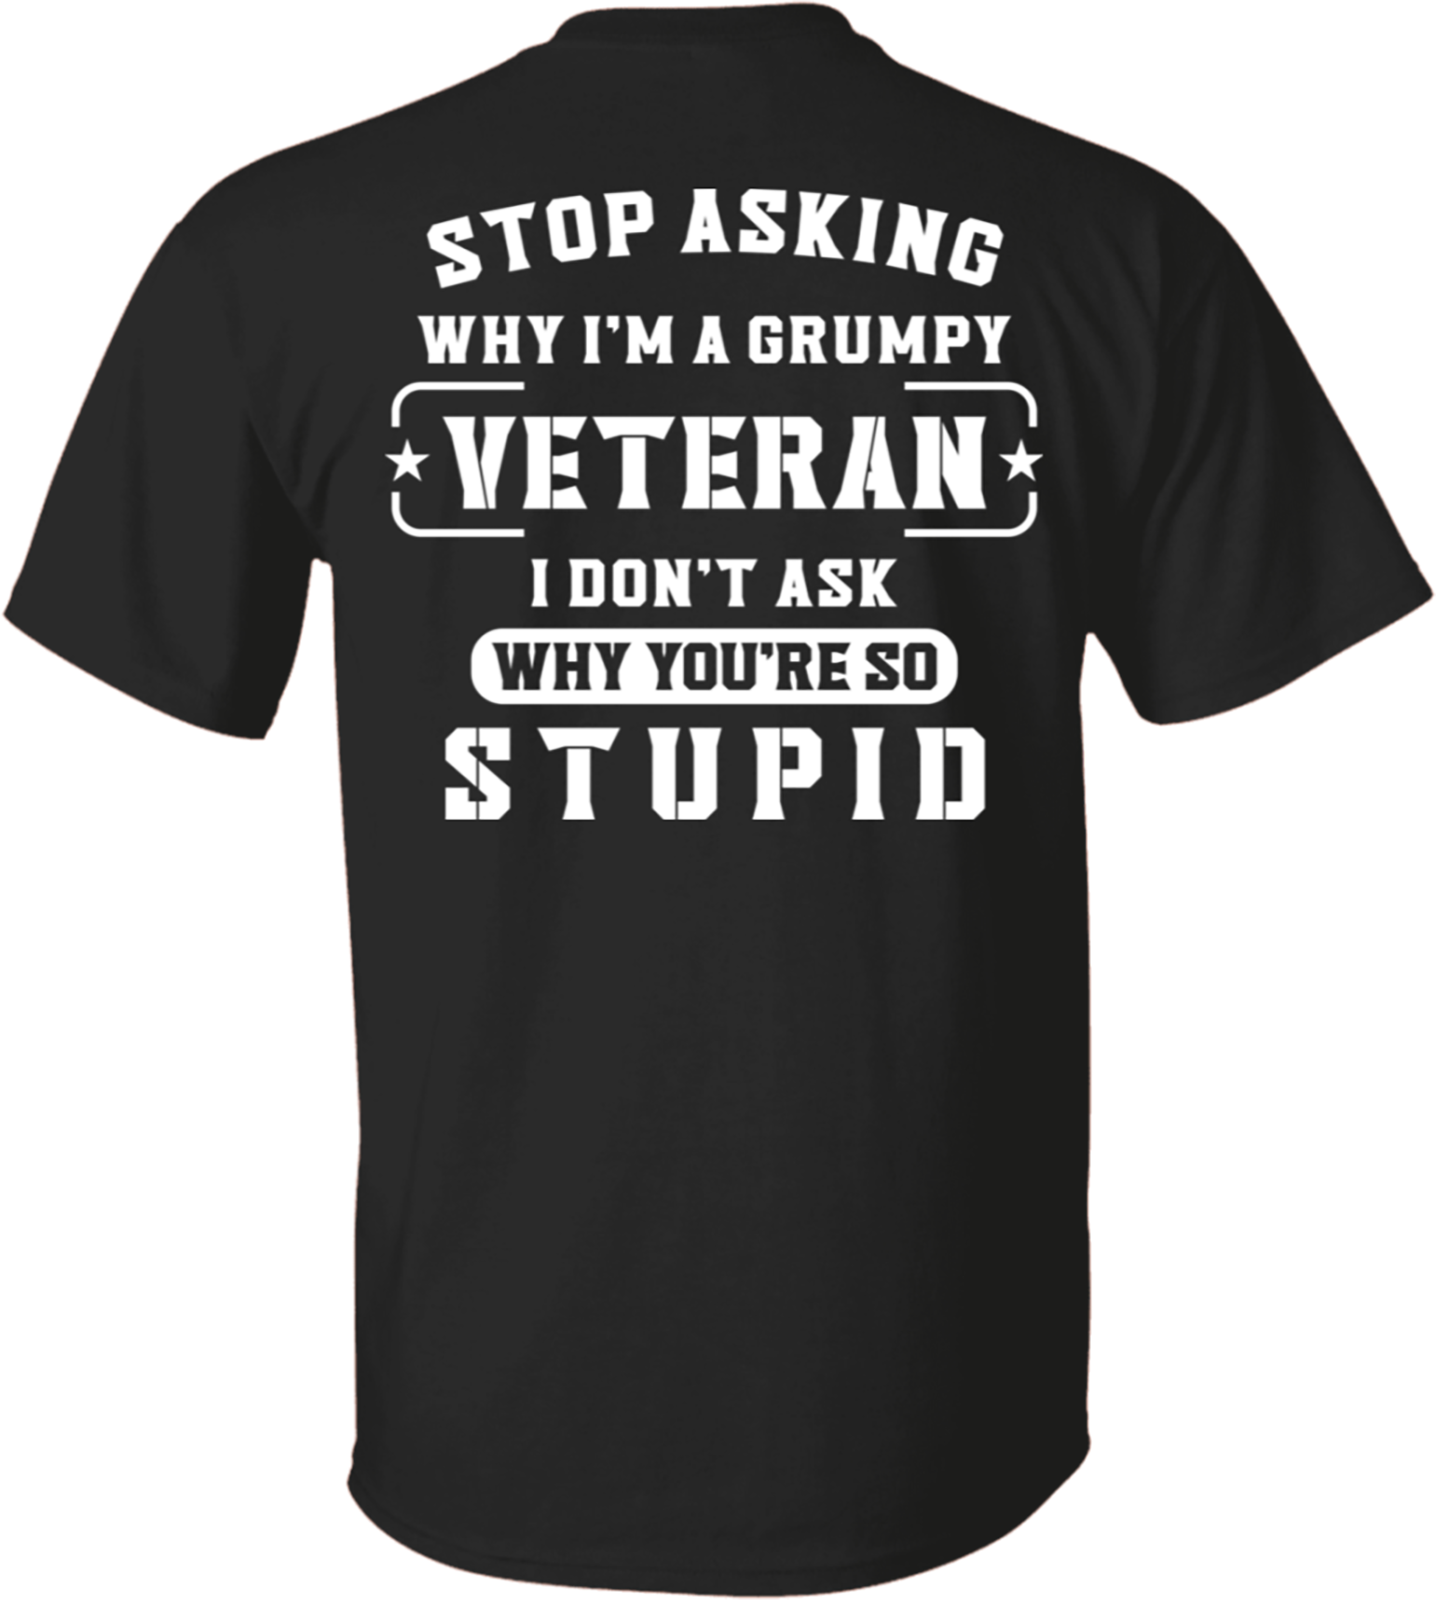 Stop asking why I'm a grumpy veteran I don't ask why you're stupid